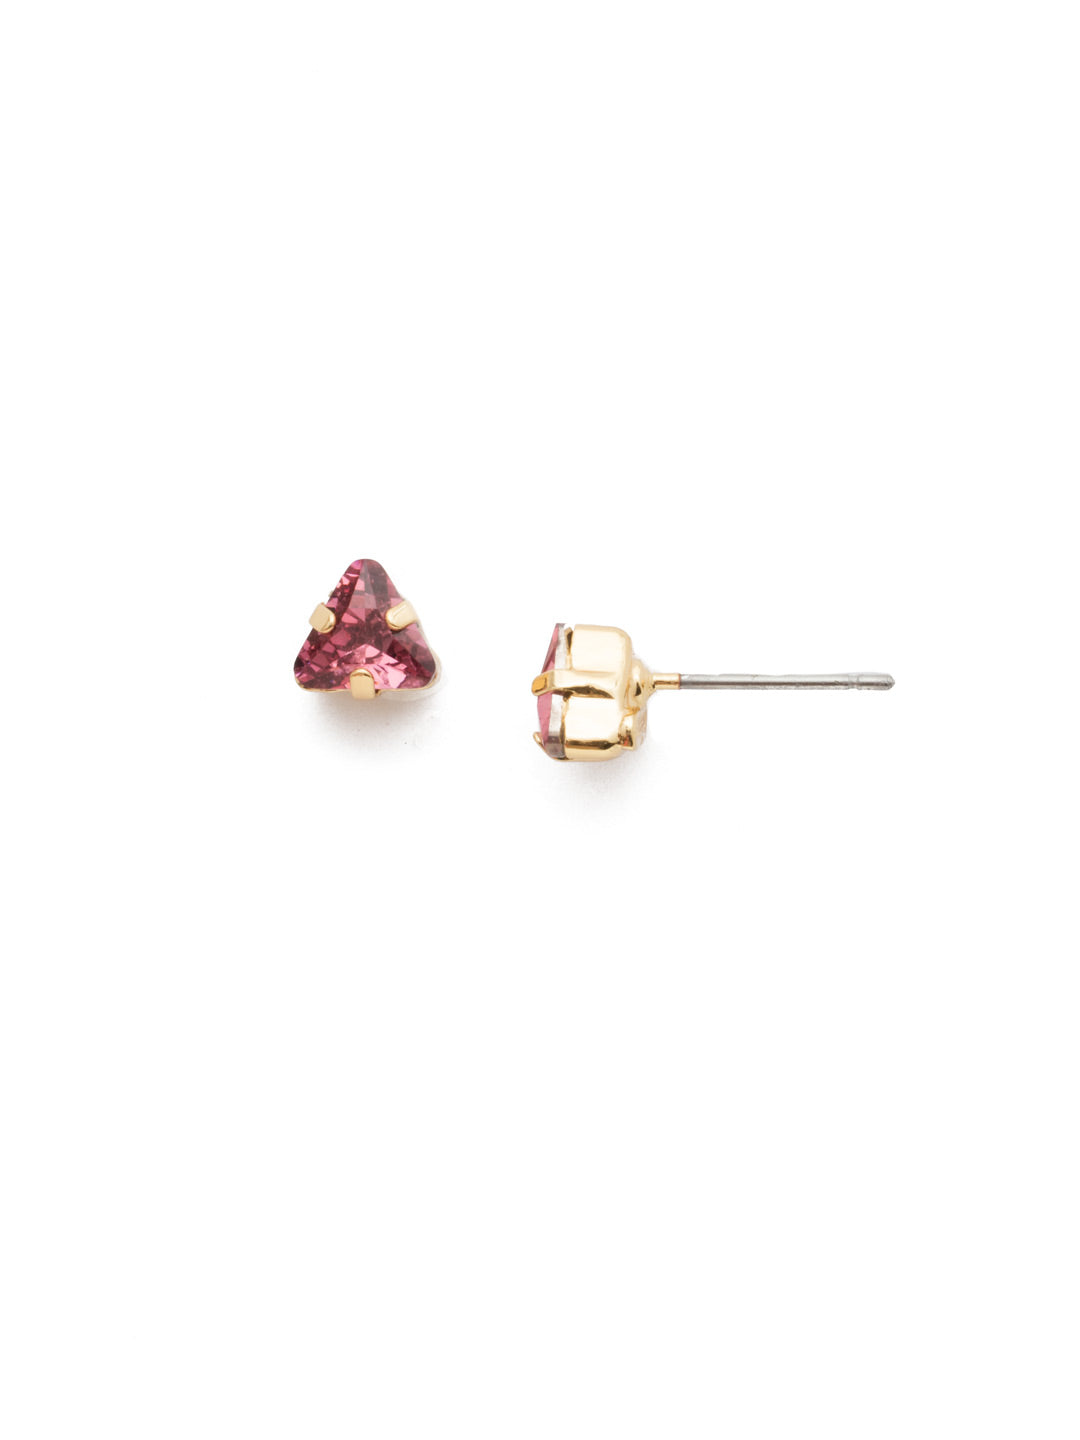 Sedge Stud Earrings - EDX1BGBGA - A shield shaped crystal in a simple pronged setting. Perfect if you want to add just a bit of sparkle to any outfit! From Sorrelli's Begonia collection in our Bright Gold-tone finish.